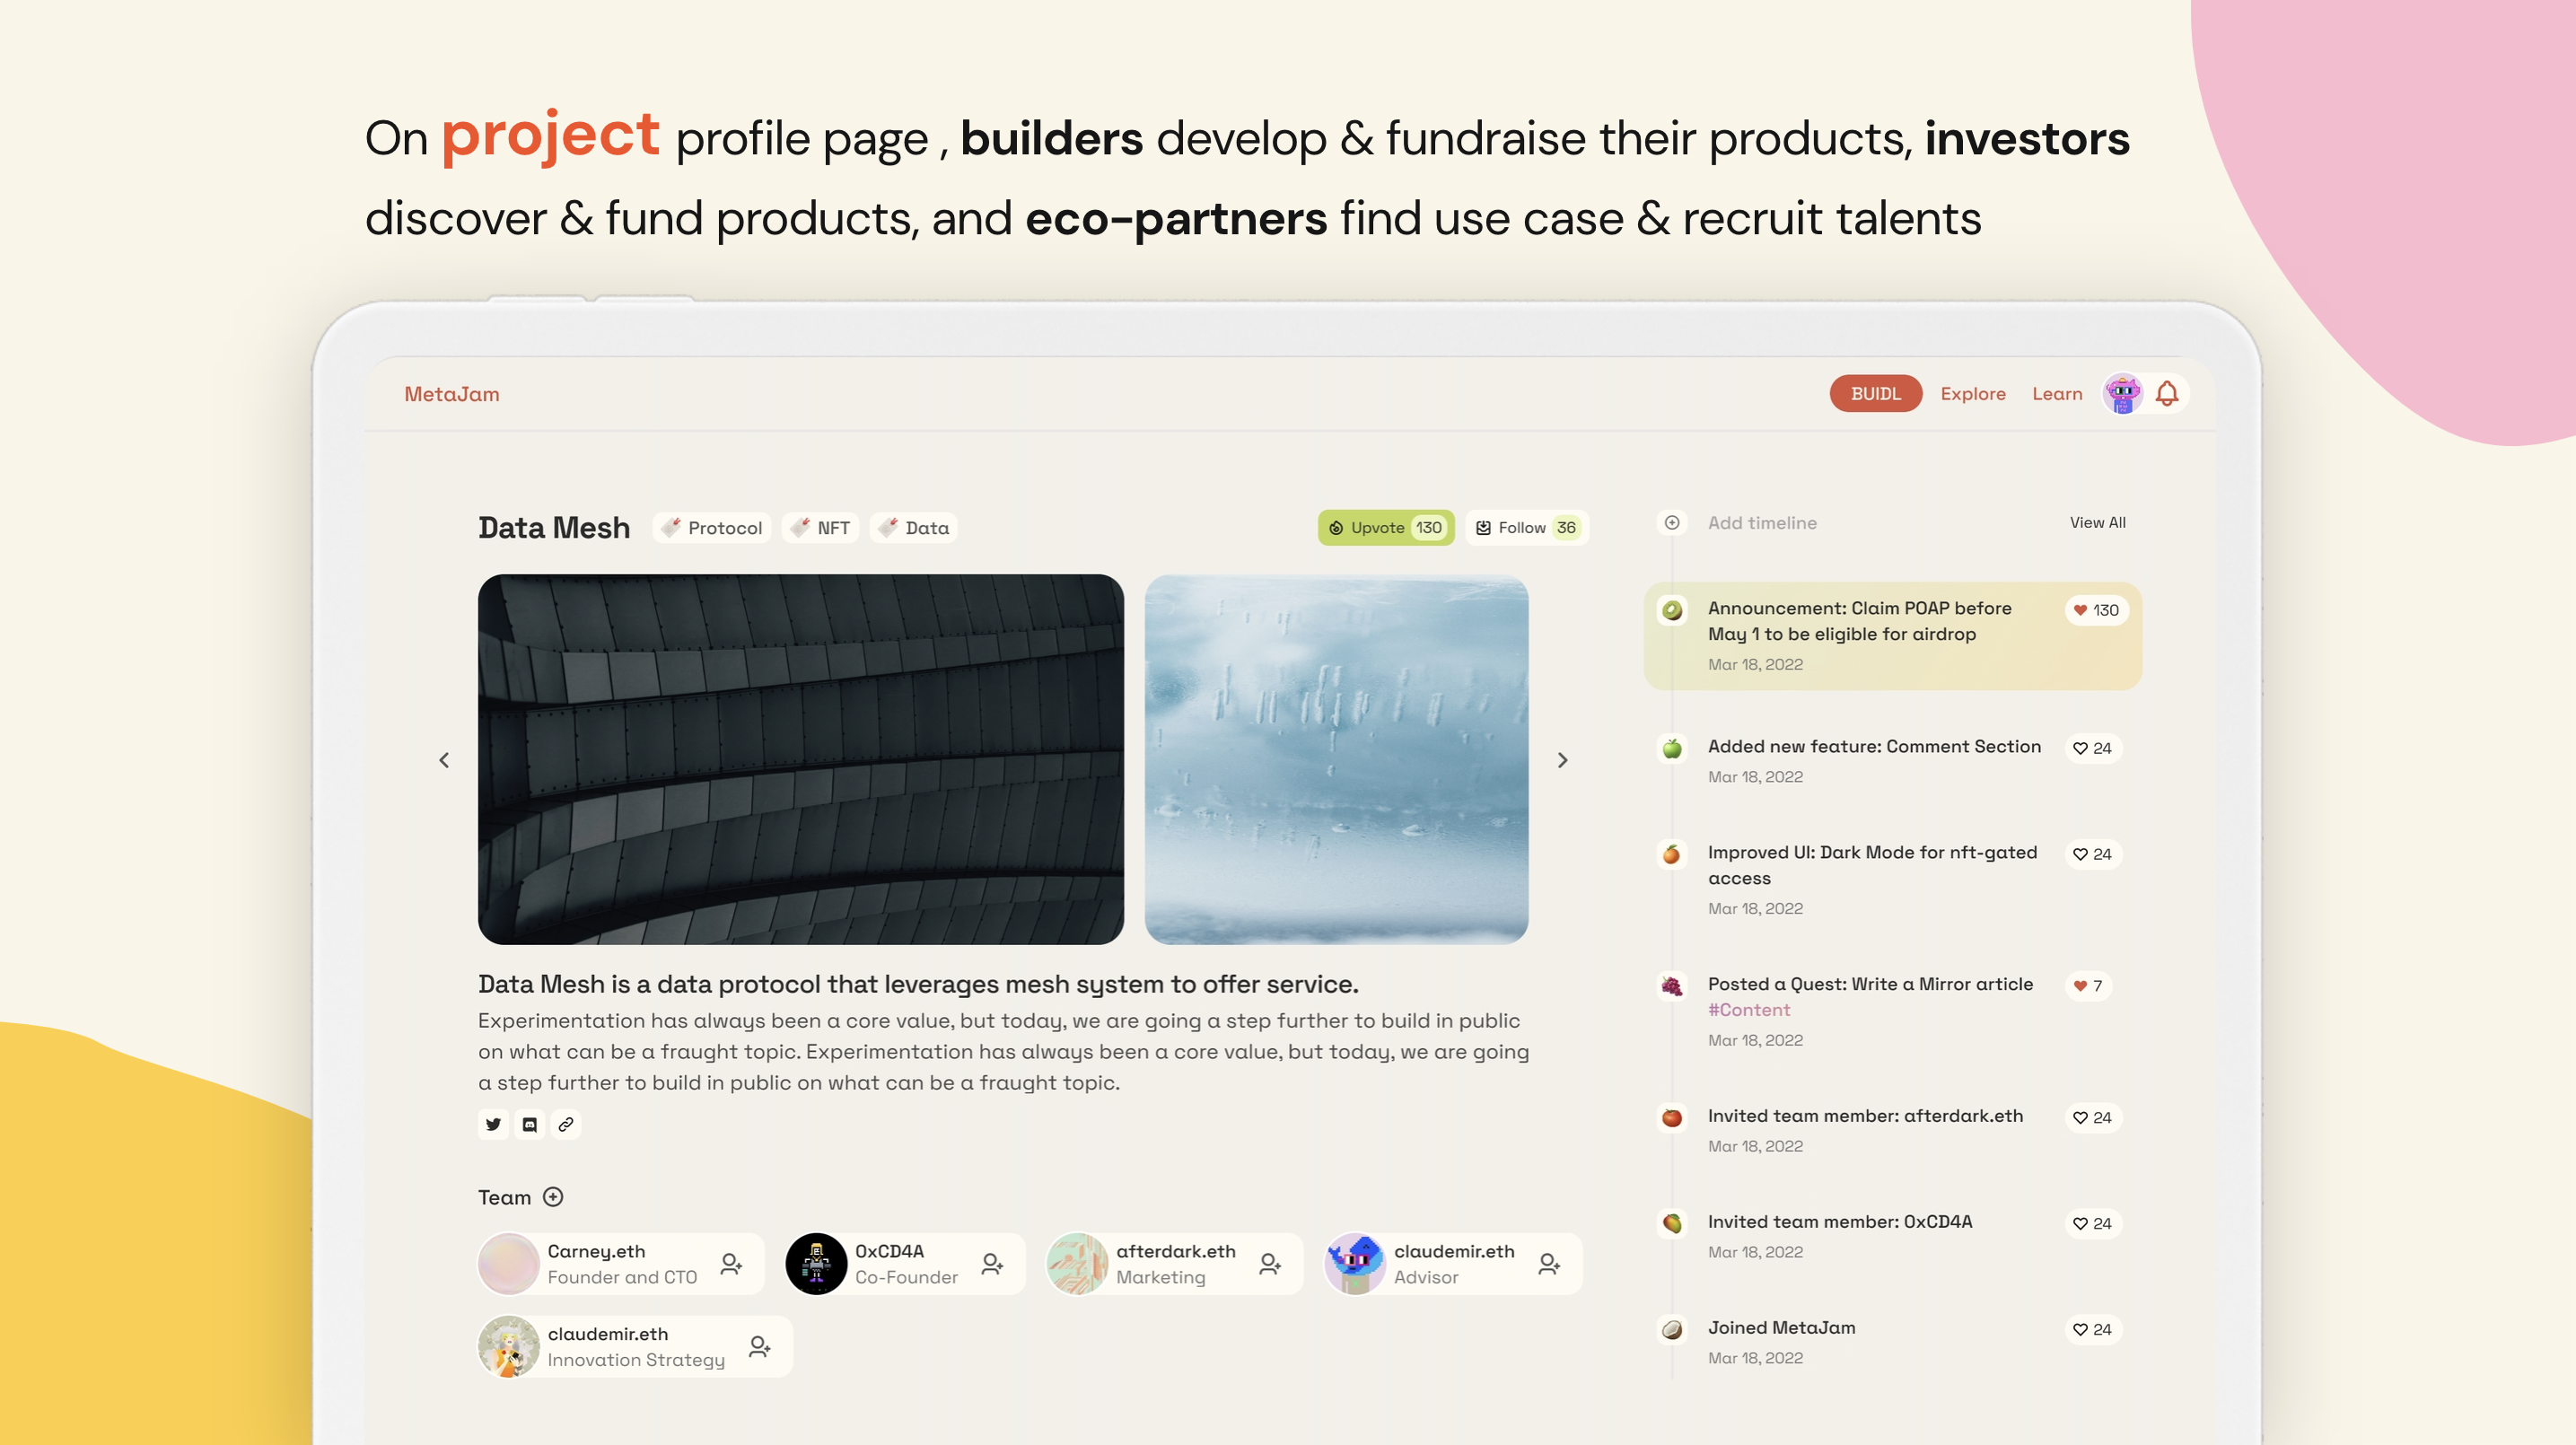 On the project profile page, builders develop & fundraise their products, investors discover & fund products, and eco-partners find use cases & recruit talents 